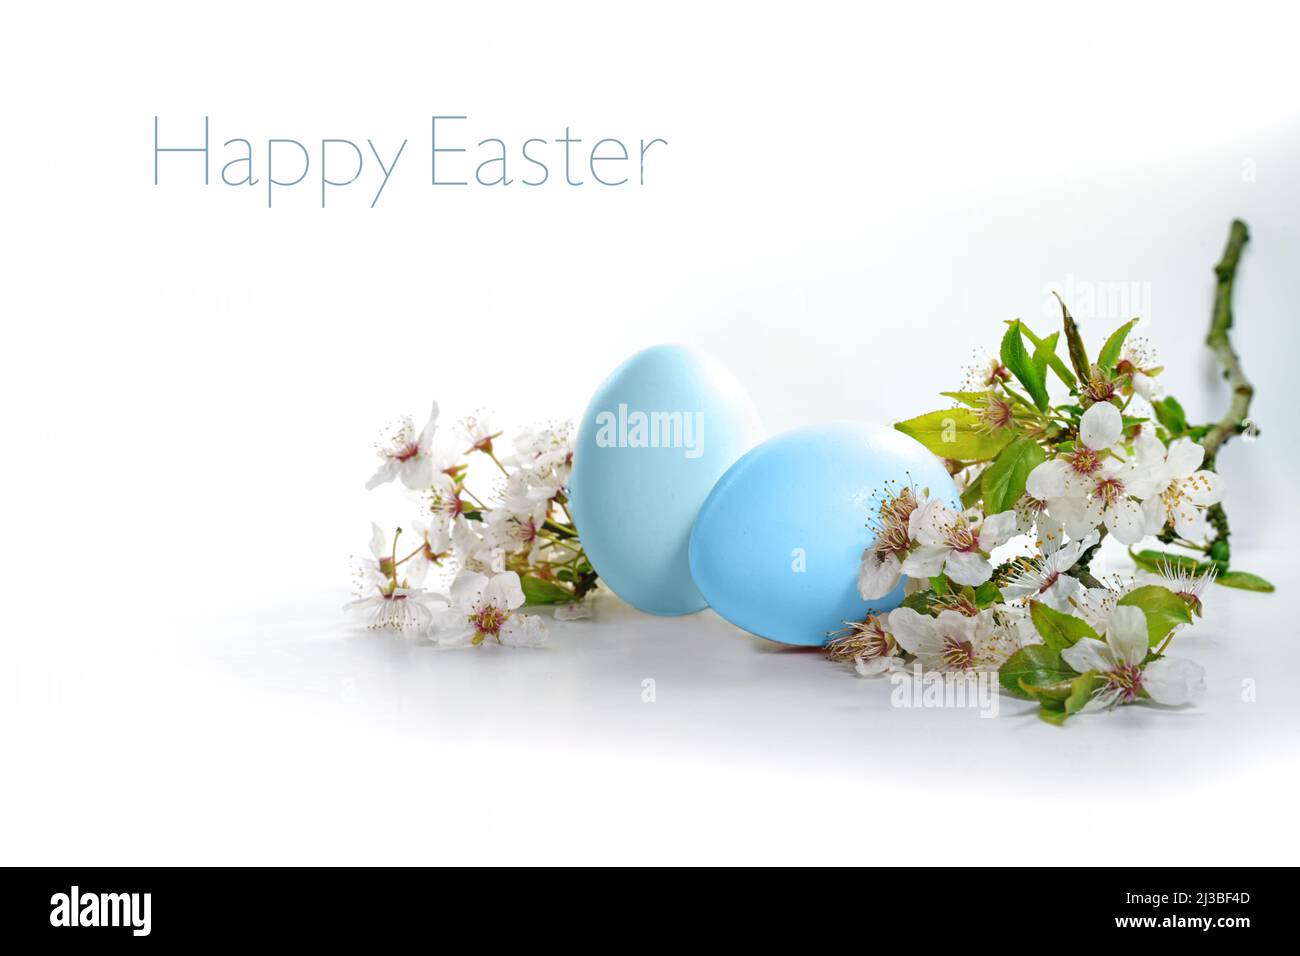 Two blue eggs and a branch of wild flowers on a white background, text Happy Easter, seasonal holiday greeting card, copy space, selected focus, narro Stock Photo